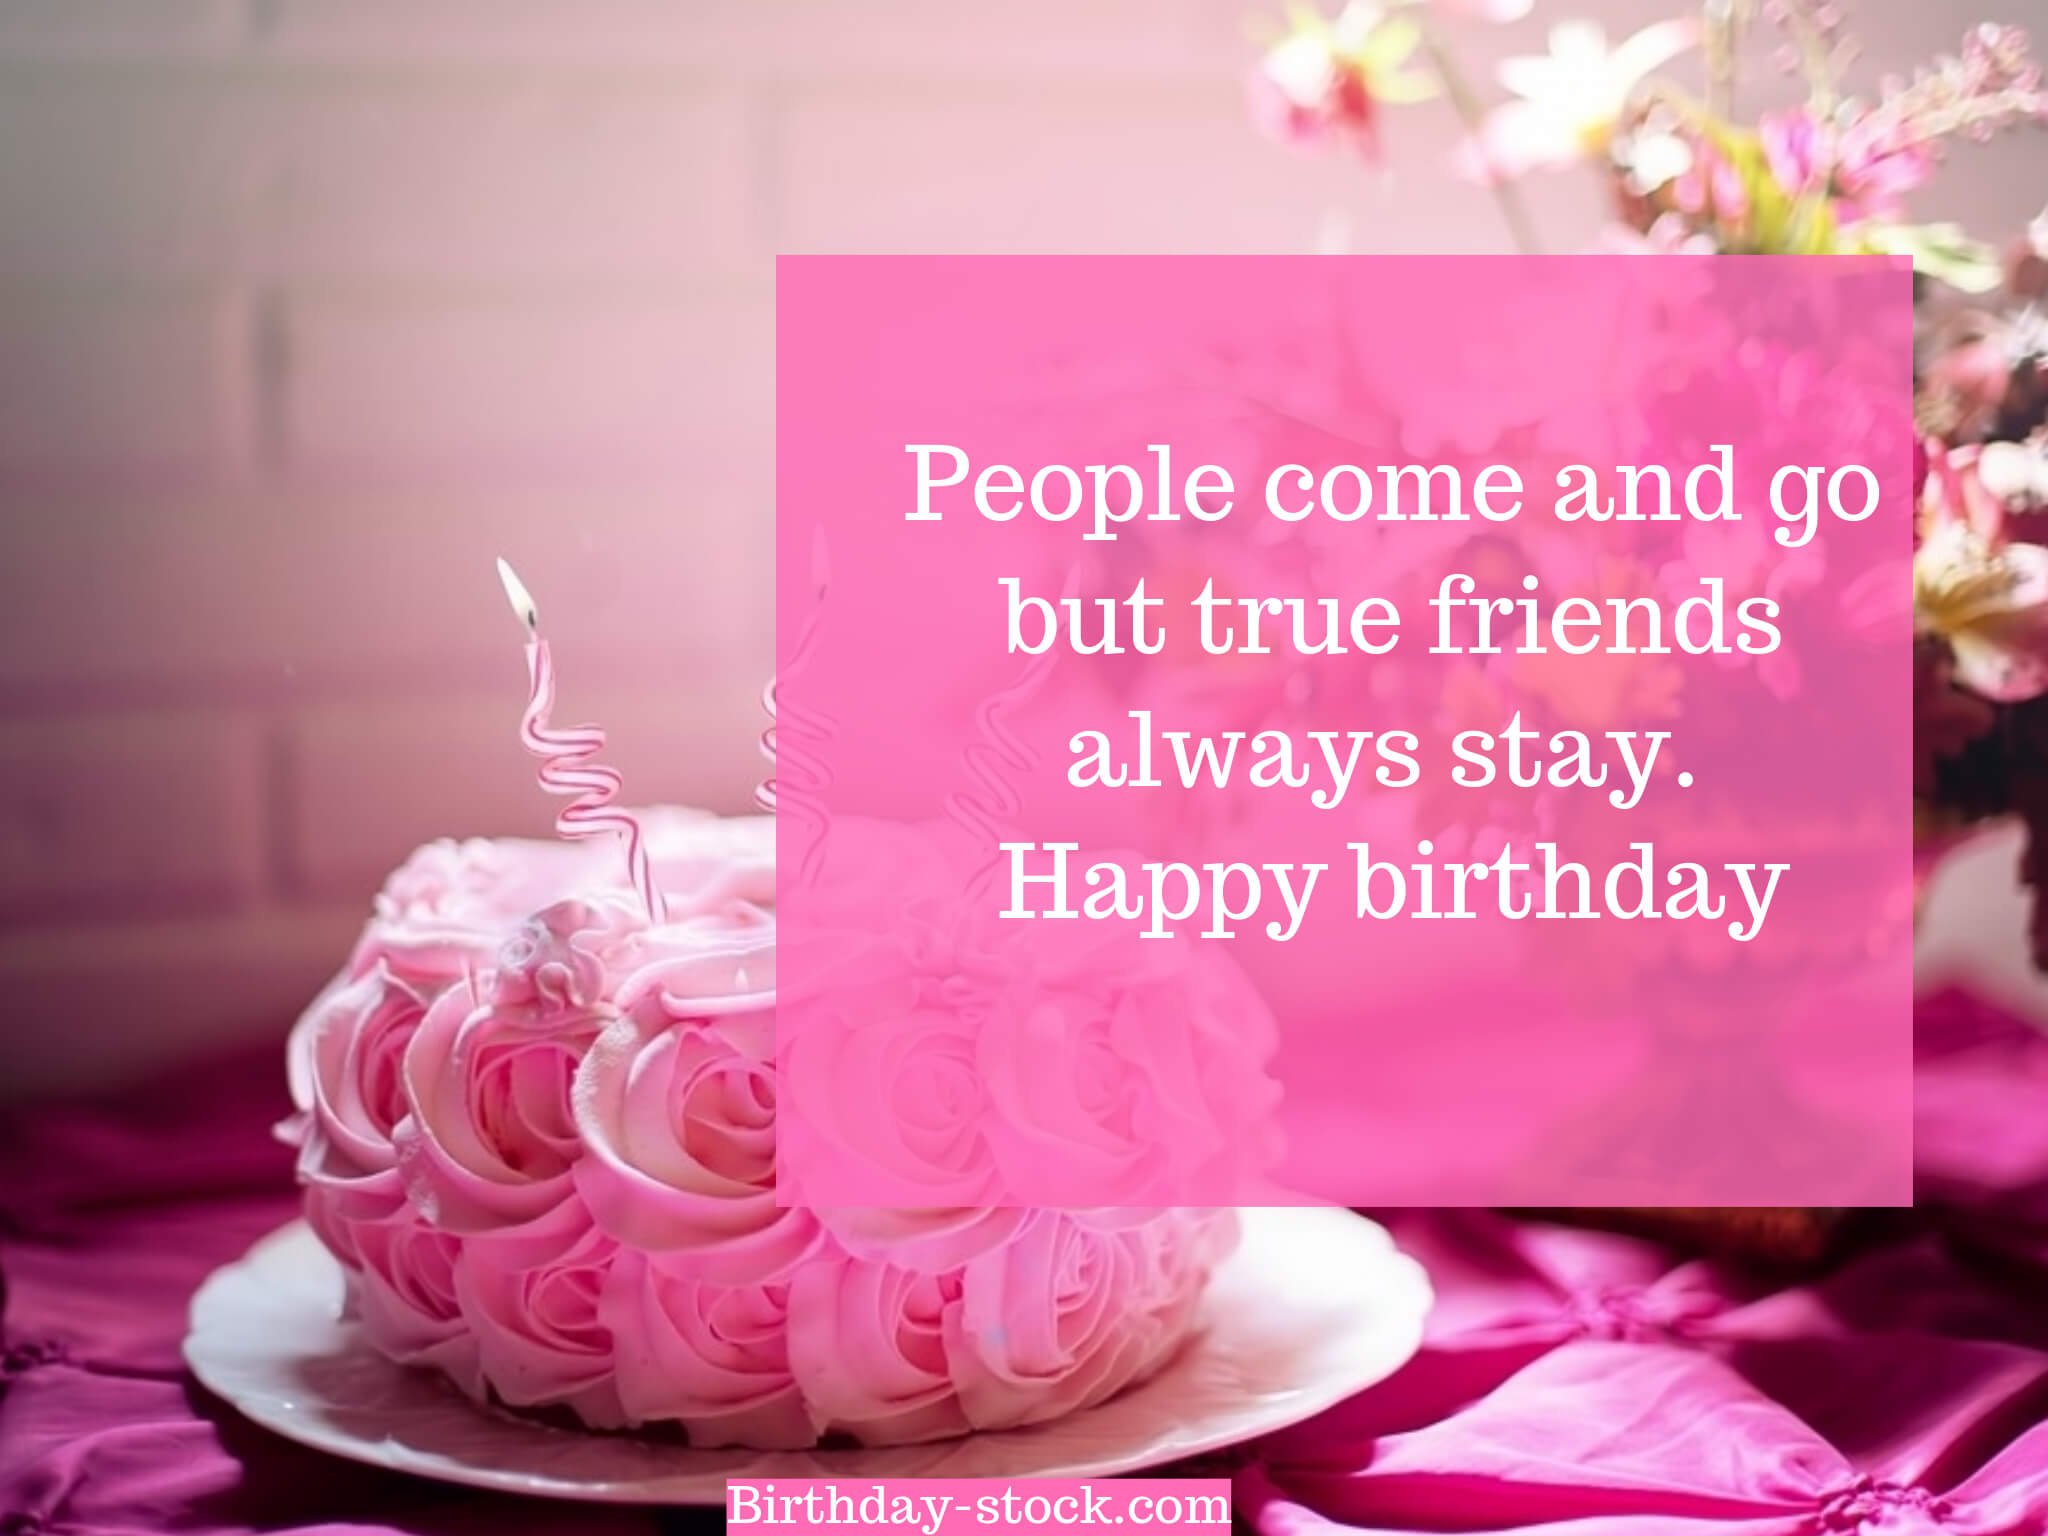 Happy Birthday Sayings With Text - Flower Birthday Wishes For Friend - HD Wallpaper 